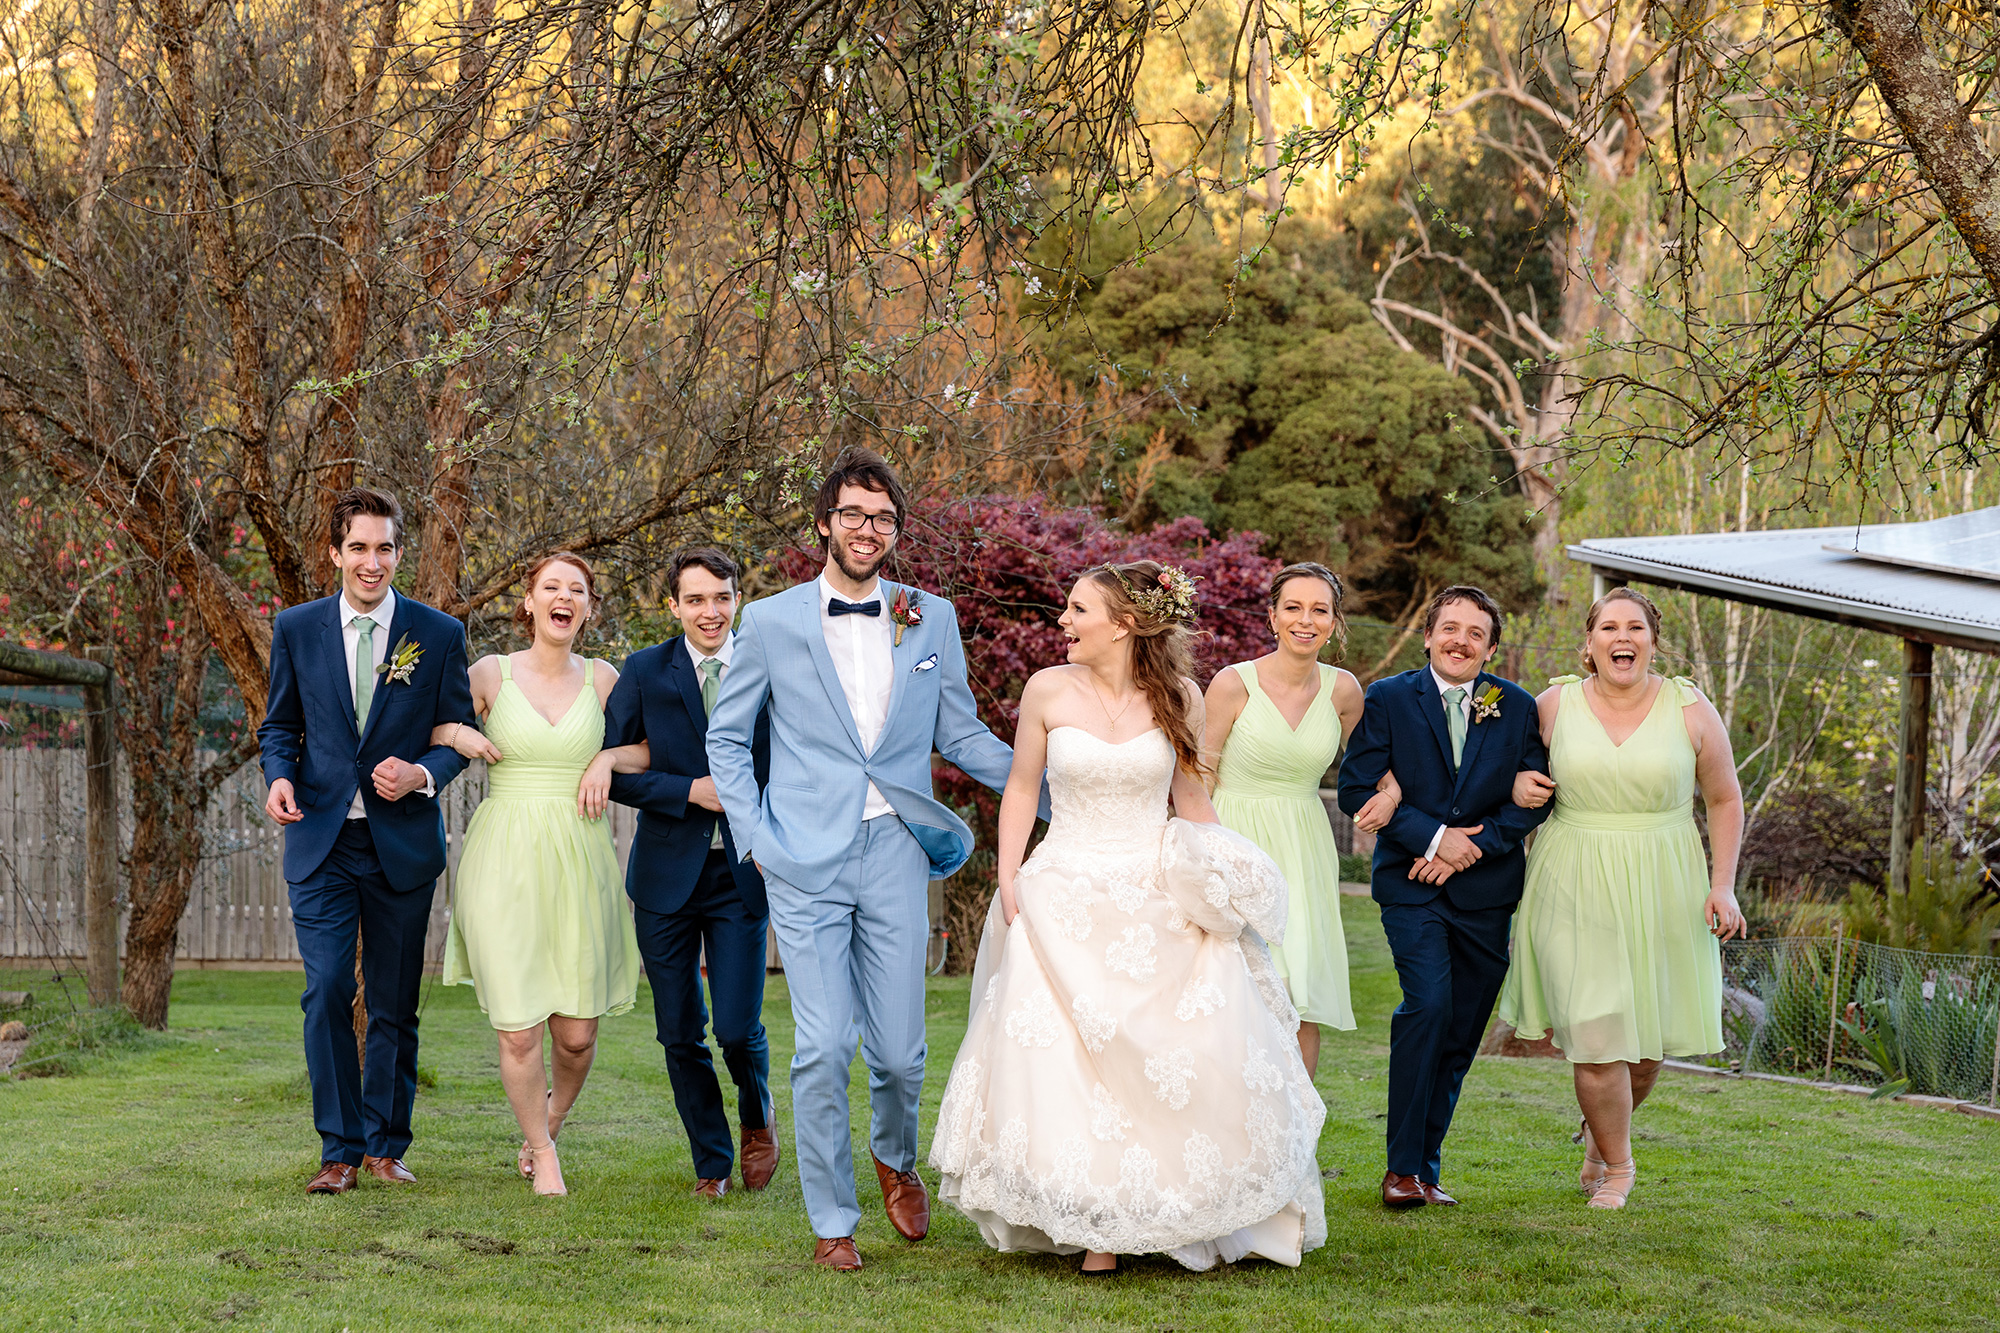 Stacey_Andrew_Rustic-Farm-Wedding_Alan-Rogers-Photography_039